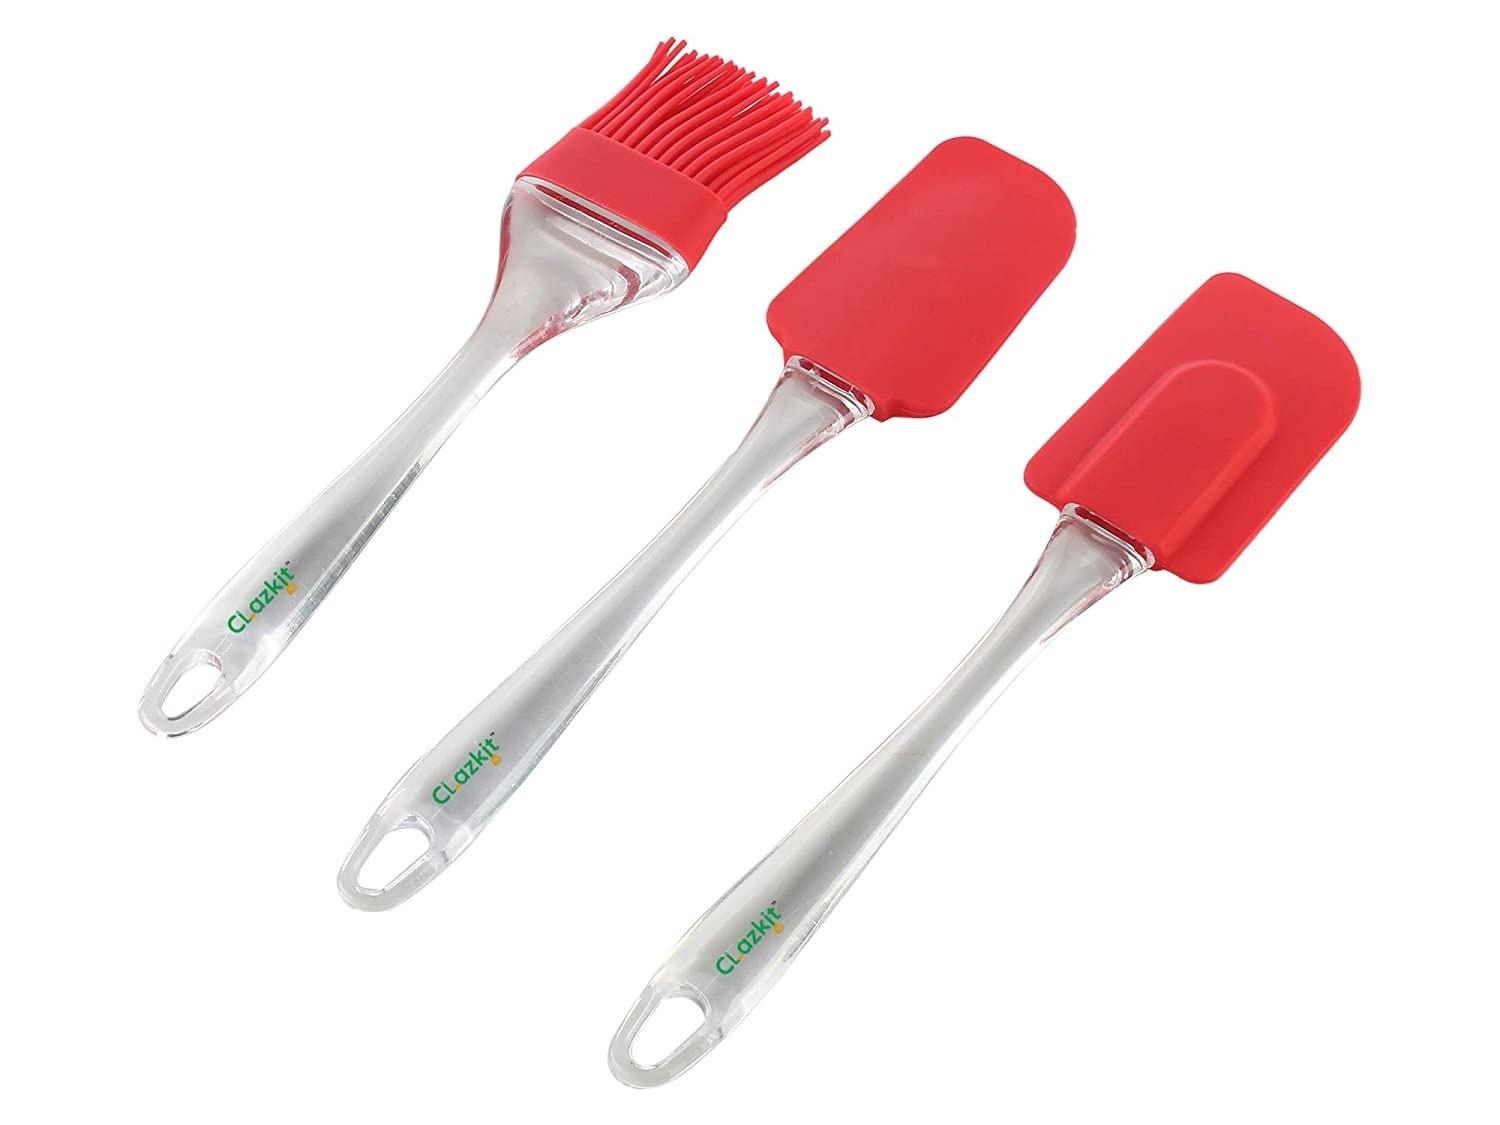 2 red silicone spatulas and 1 red silicone brush.